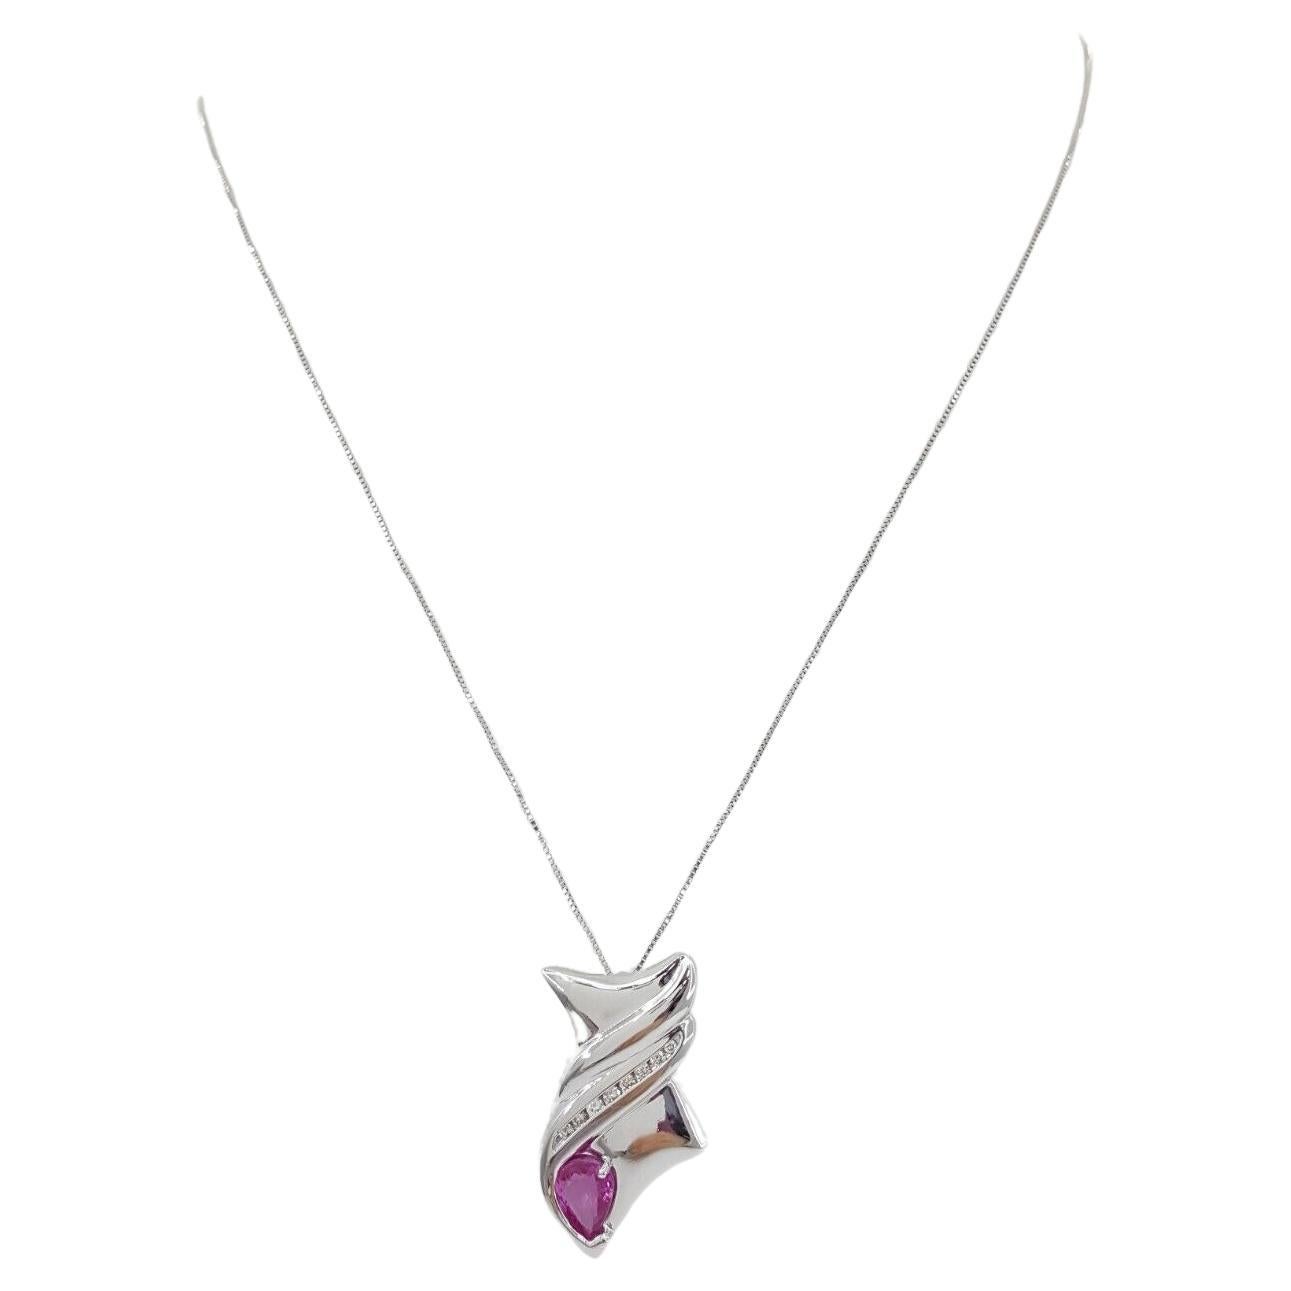 Le Vian 14K White Gold Pendant & Necklace featuring a Total Weight of 1.29 ct Pear Brilliant Cut Pink Sapphire & Diamonds, with an 18